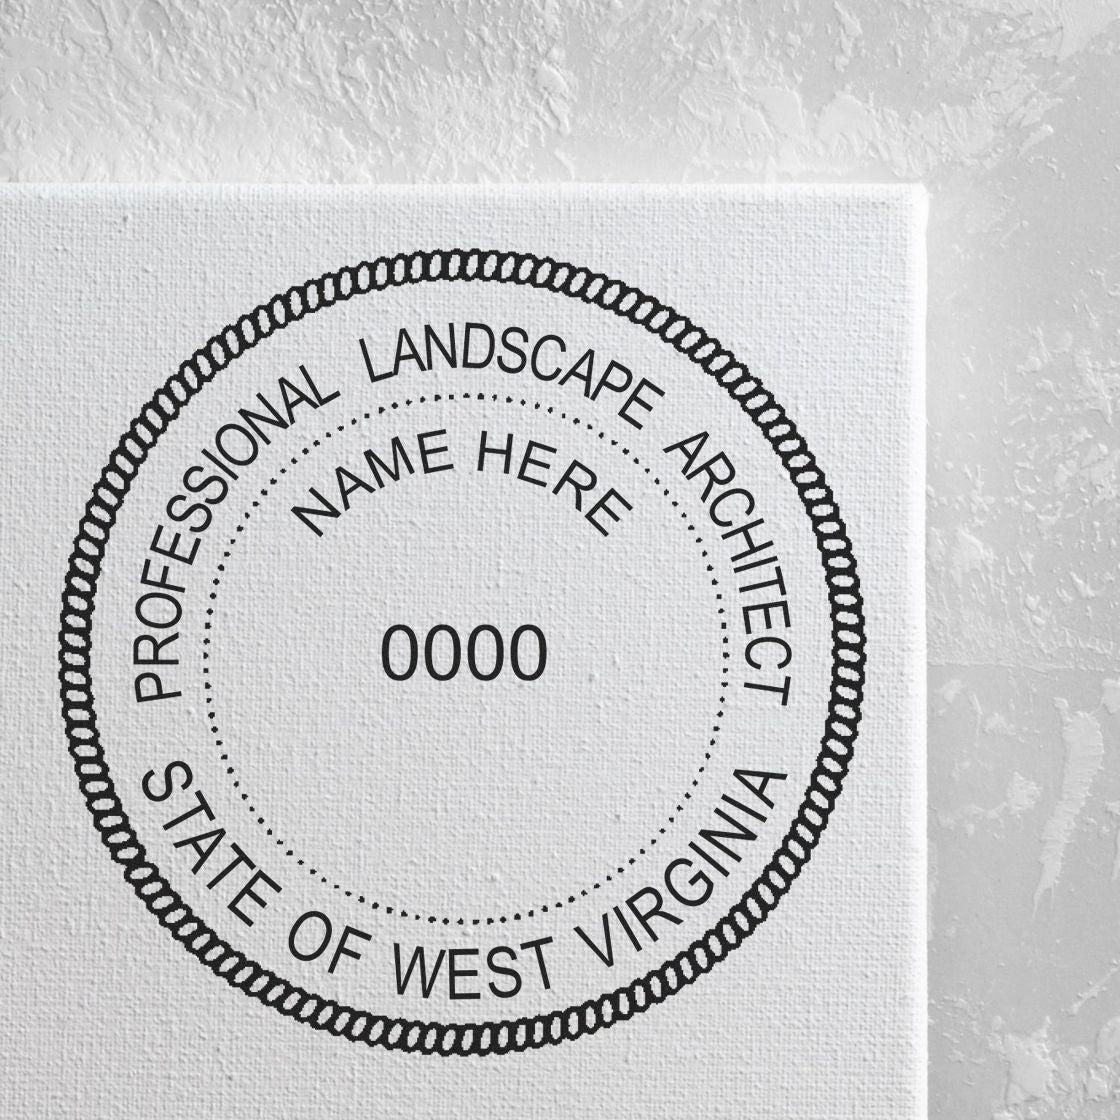 Premium MaxLight Pre-Inked West Virginia Landscape Architectural Stamp in use photo showing a stamped imprint of the Premium MaxLight Pre-Inked West Virginia Landscape Architectural Stamp